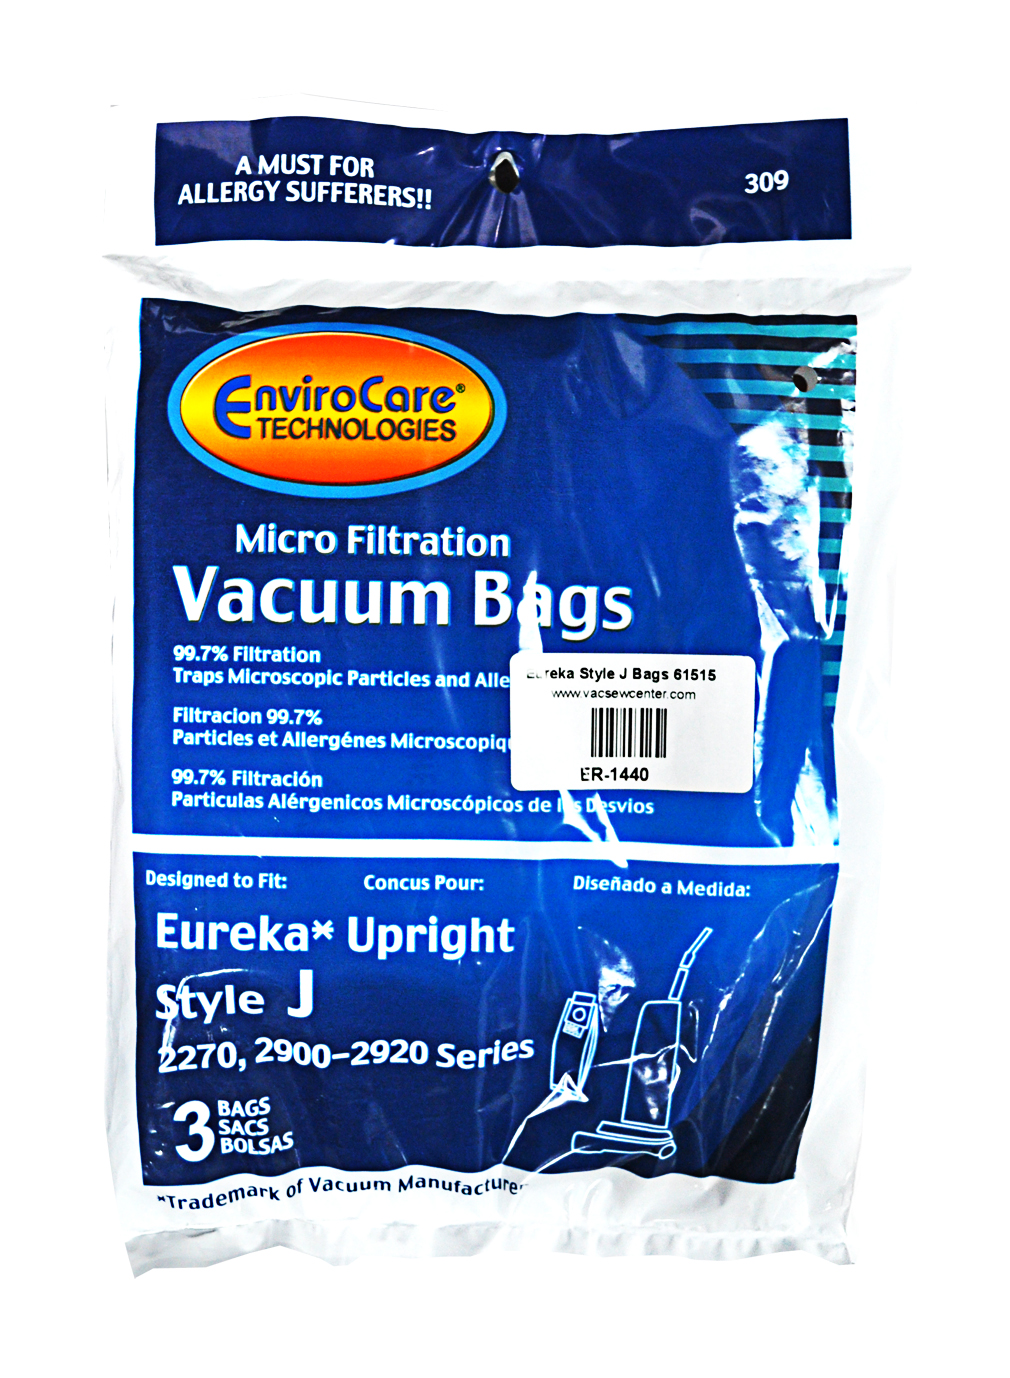 Eureka Upright Style J Bags designed to fit Eureka Upright Vacuum using Style J Bags, 99.7 Microfiltration, 3 bags